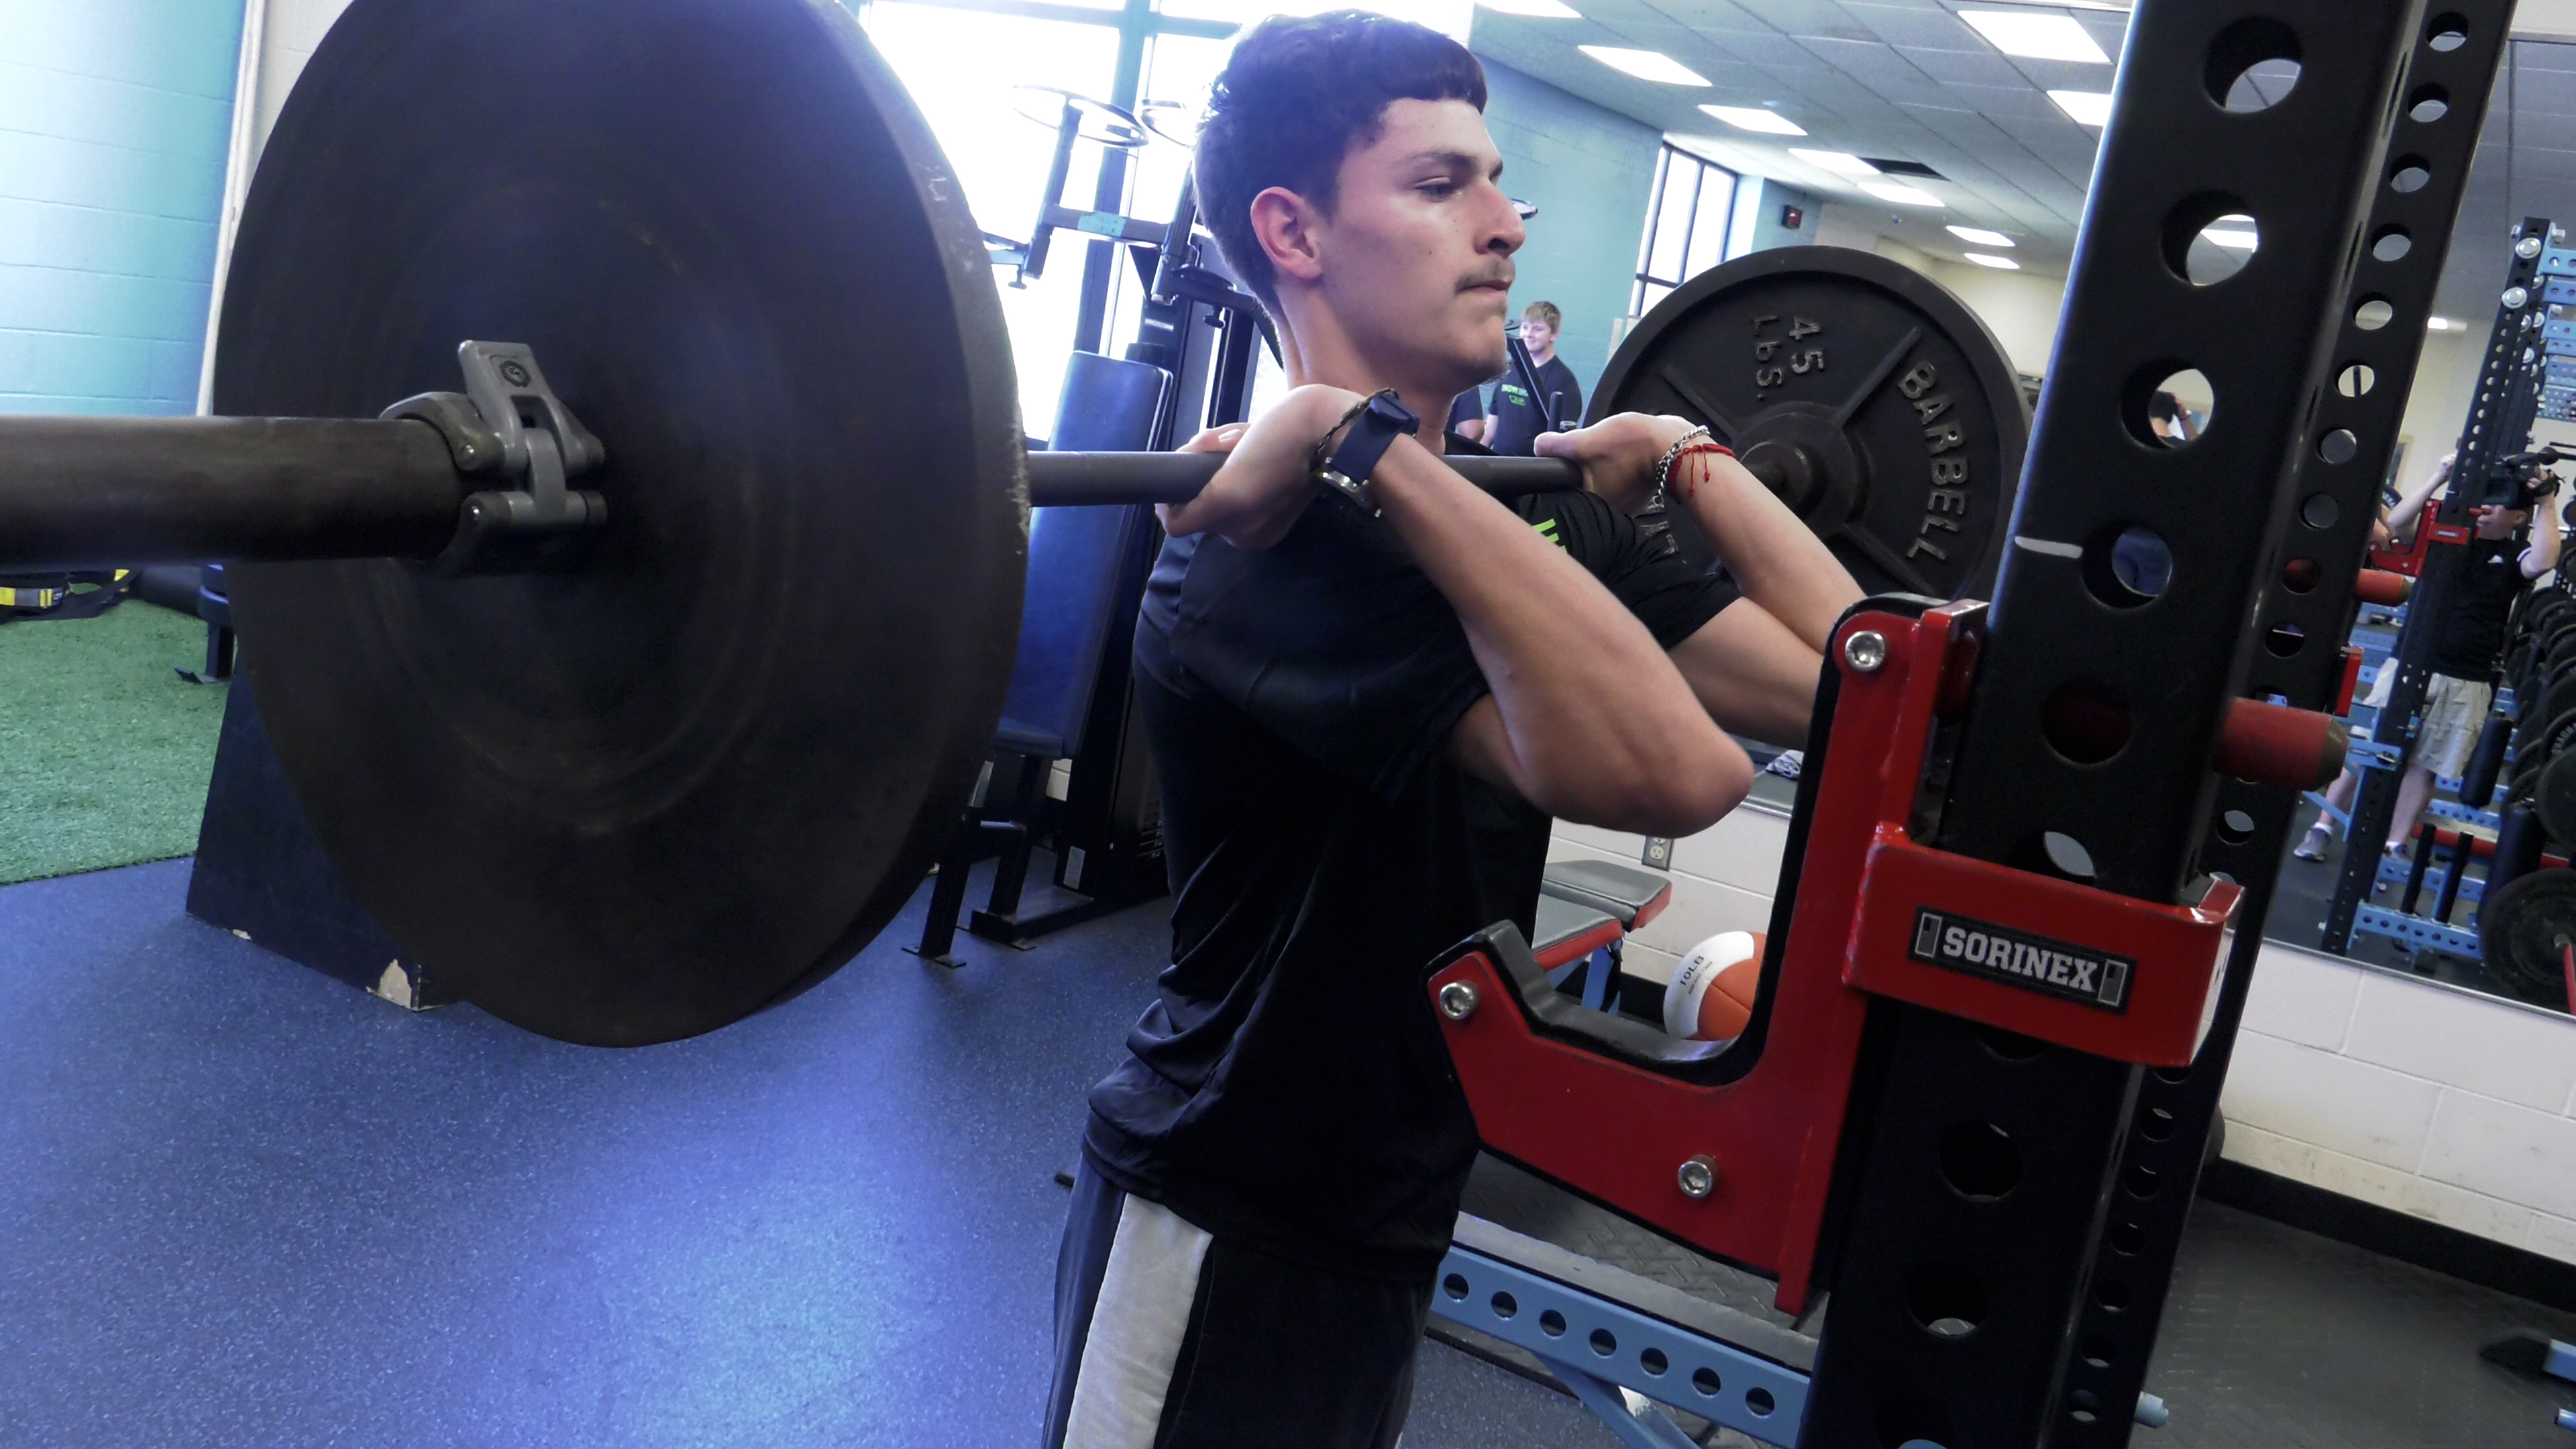 PSM Performance strength & conditioning now part of Lakeland Jr/Sr High School curriculum